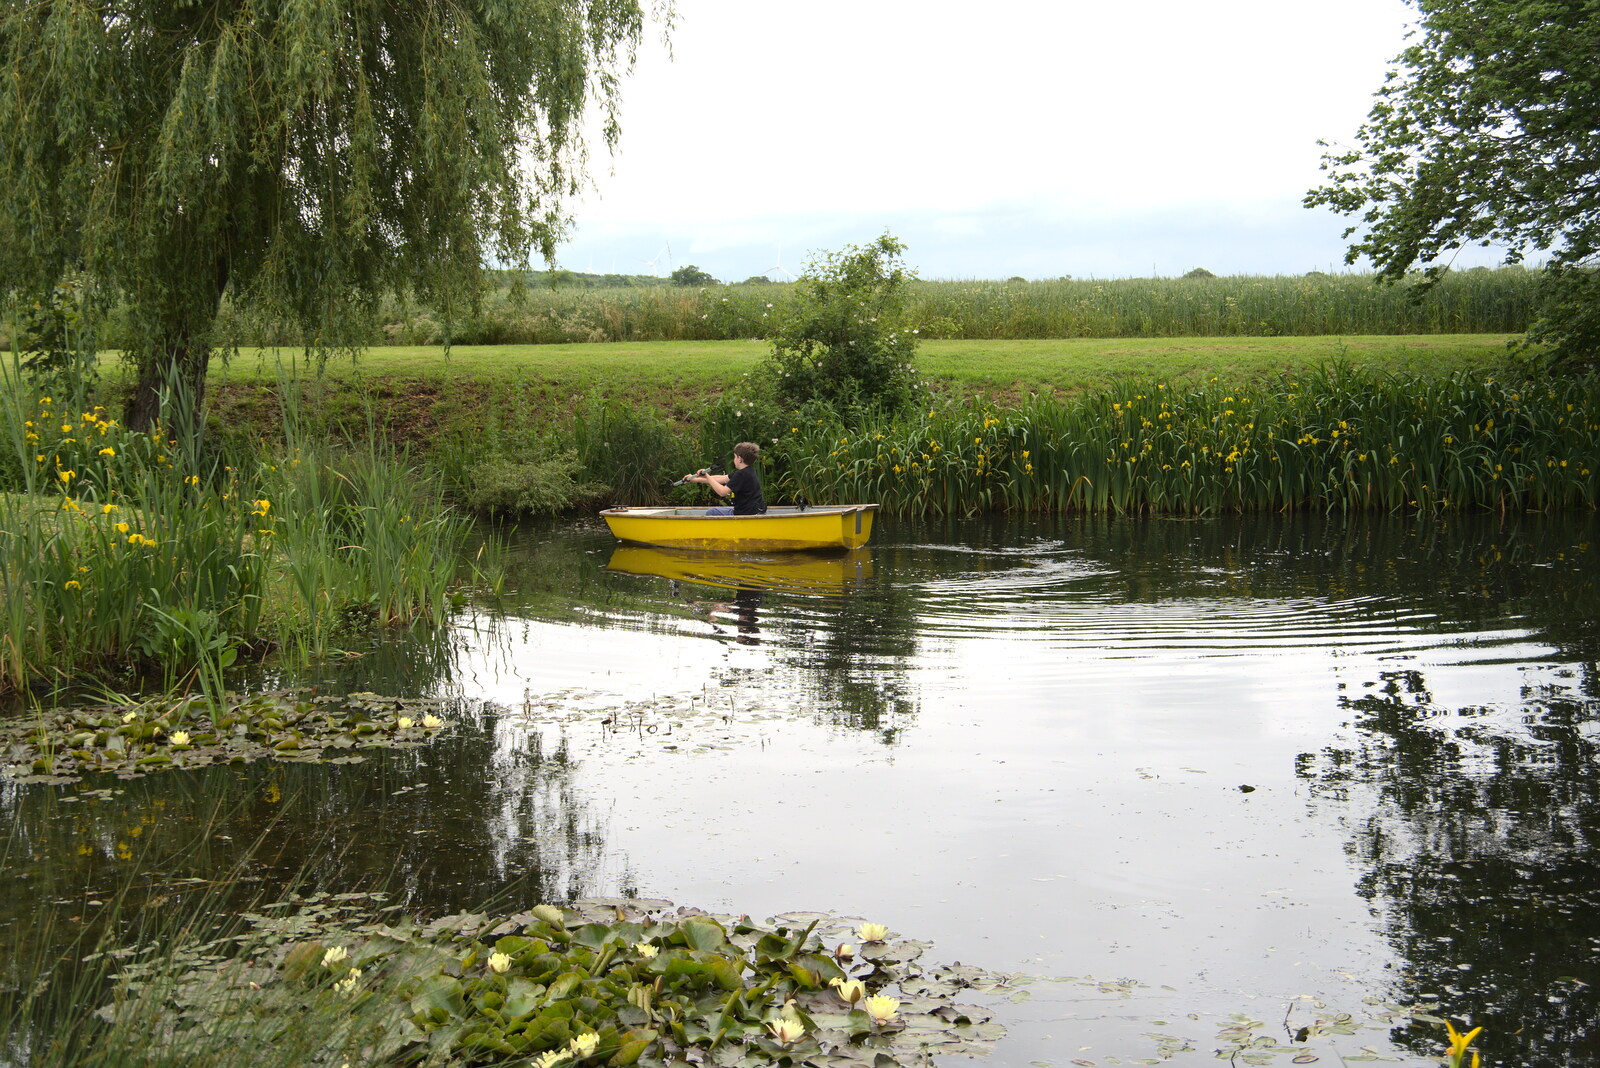 Fred floats off for a row around the pond from Suze-fest, Braisworth, Suffolk - 19th June 2021